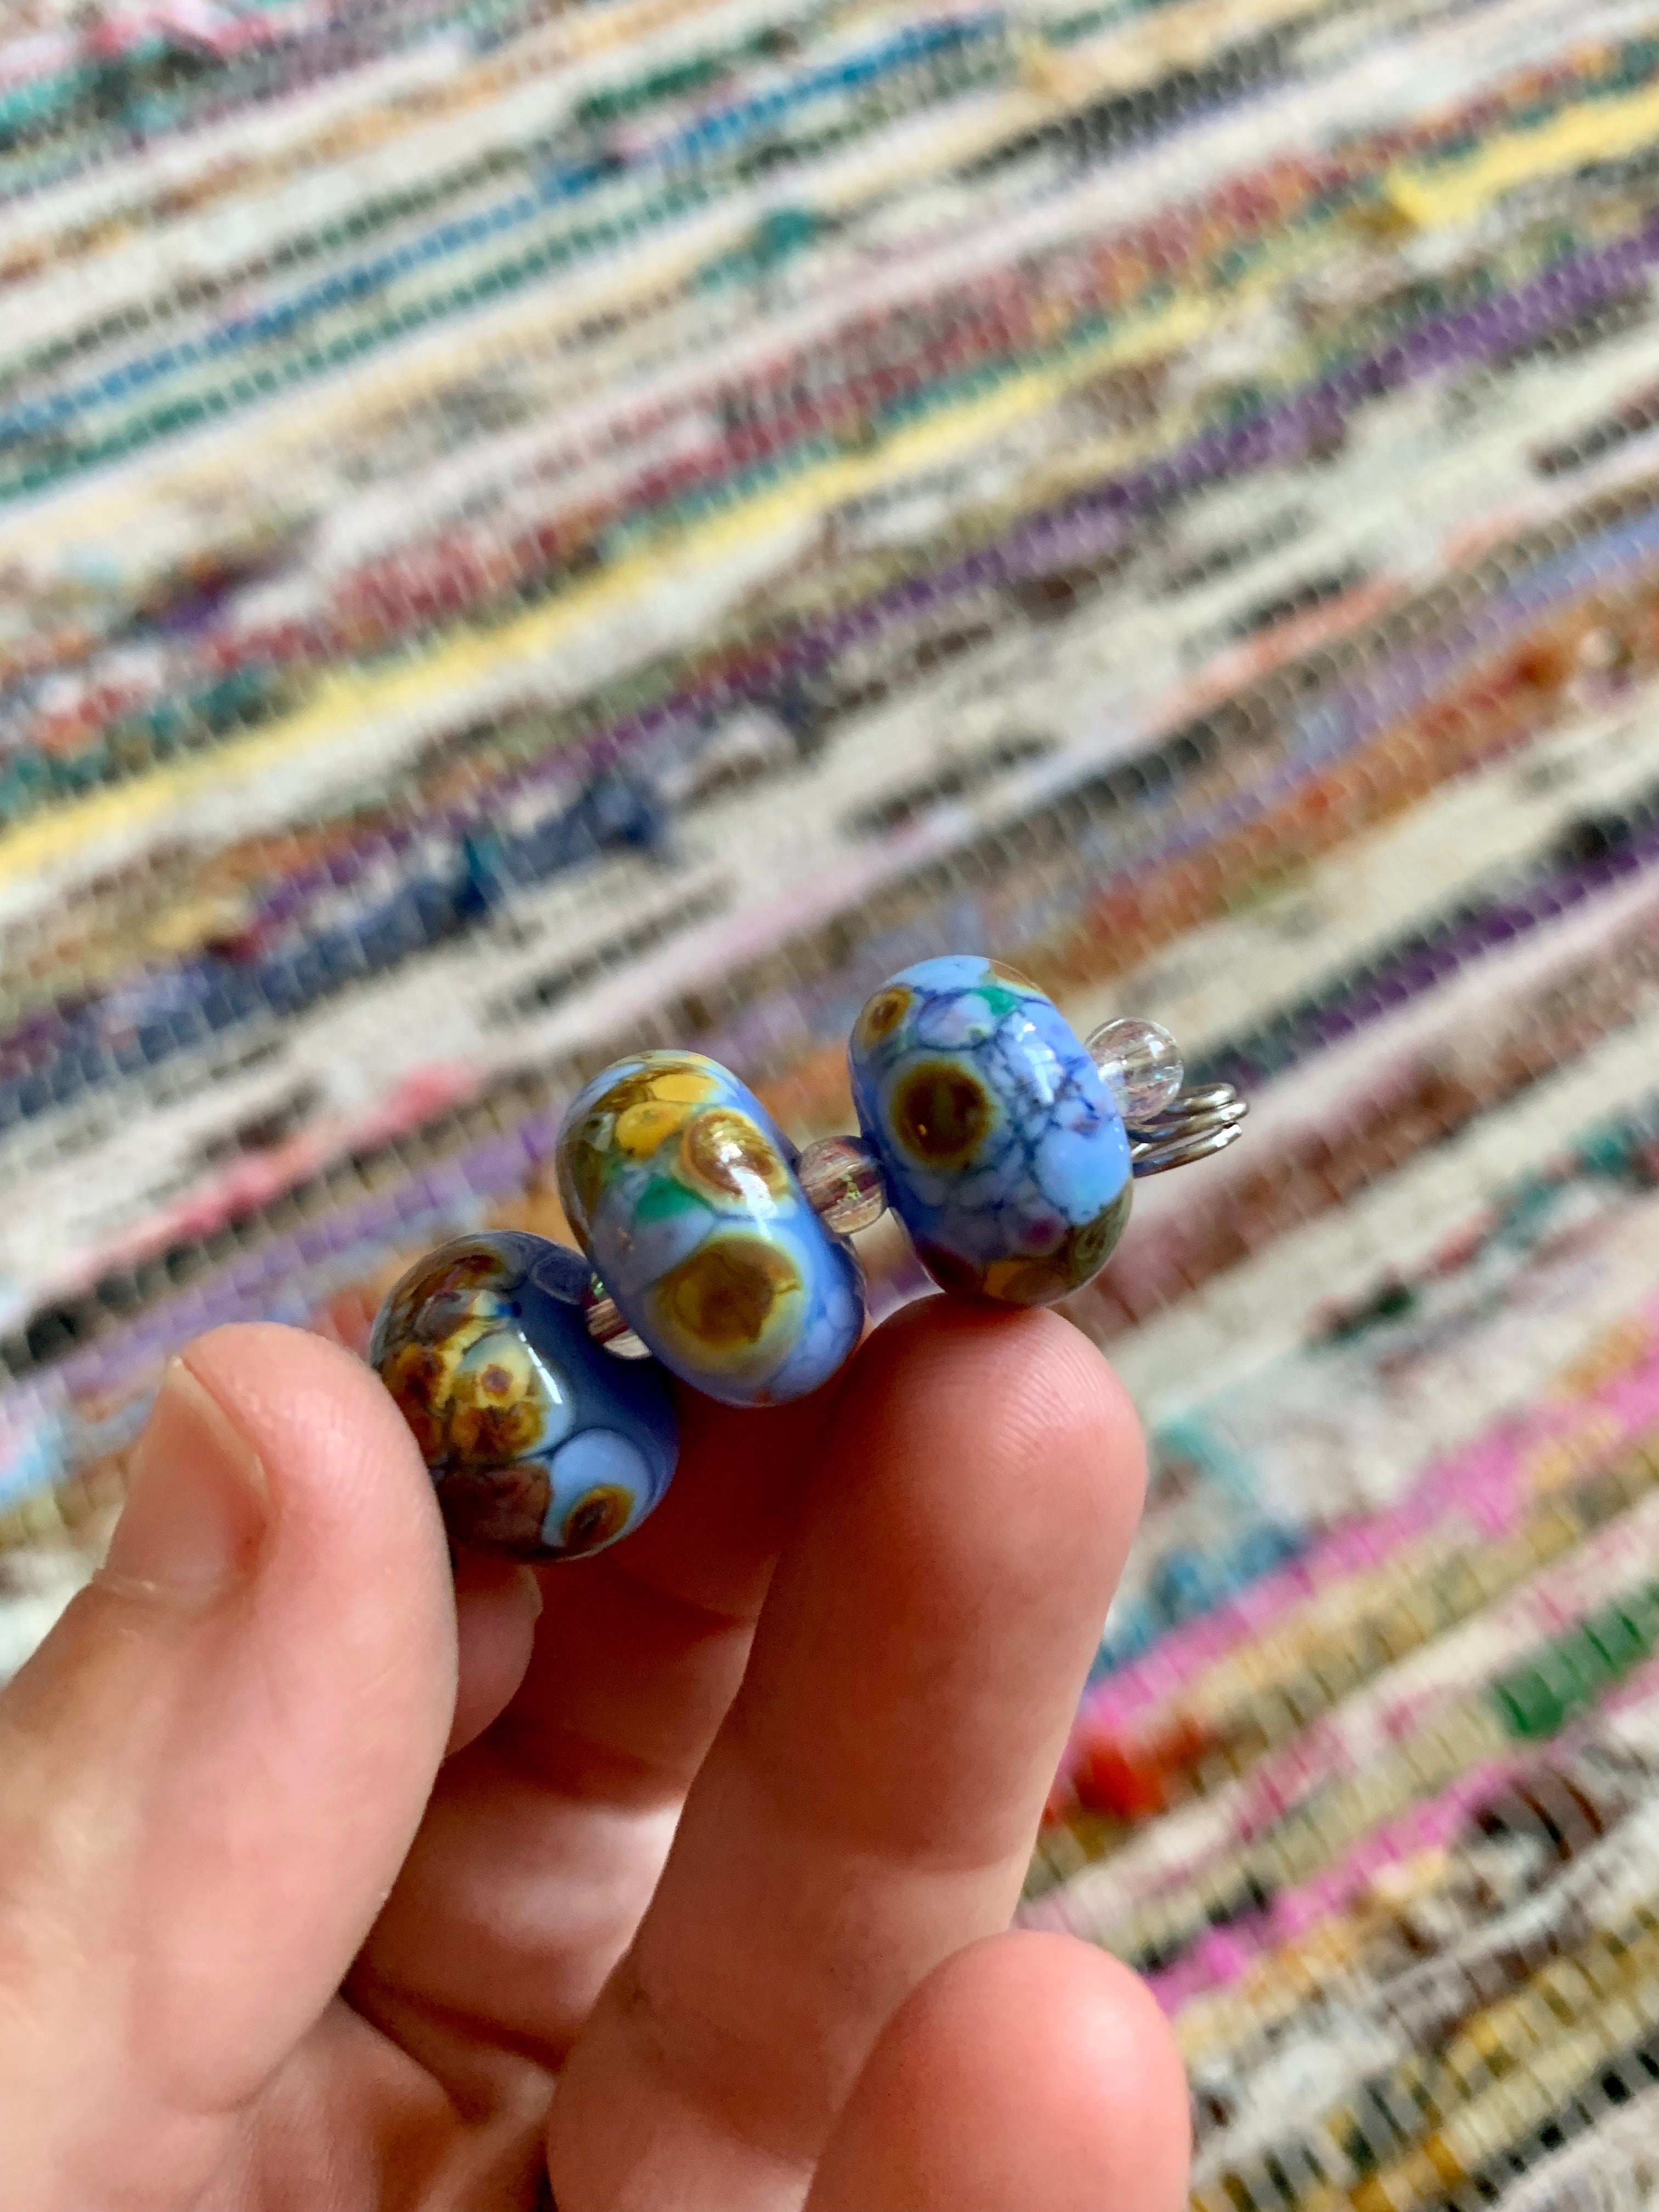 Set of 3 stunning periwinkle lampwork glass beads with multicolor speckling